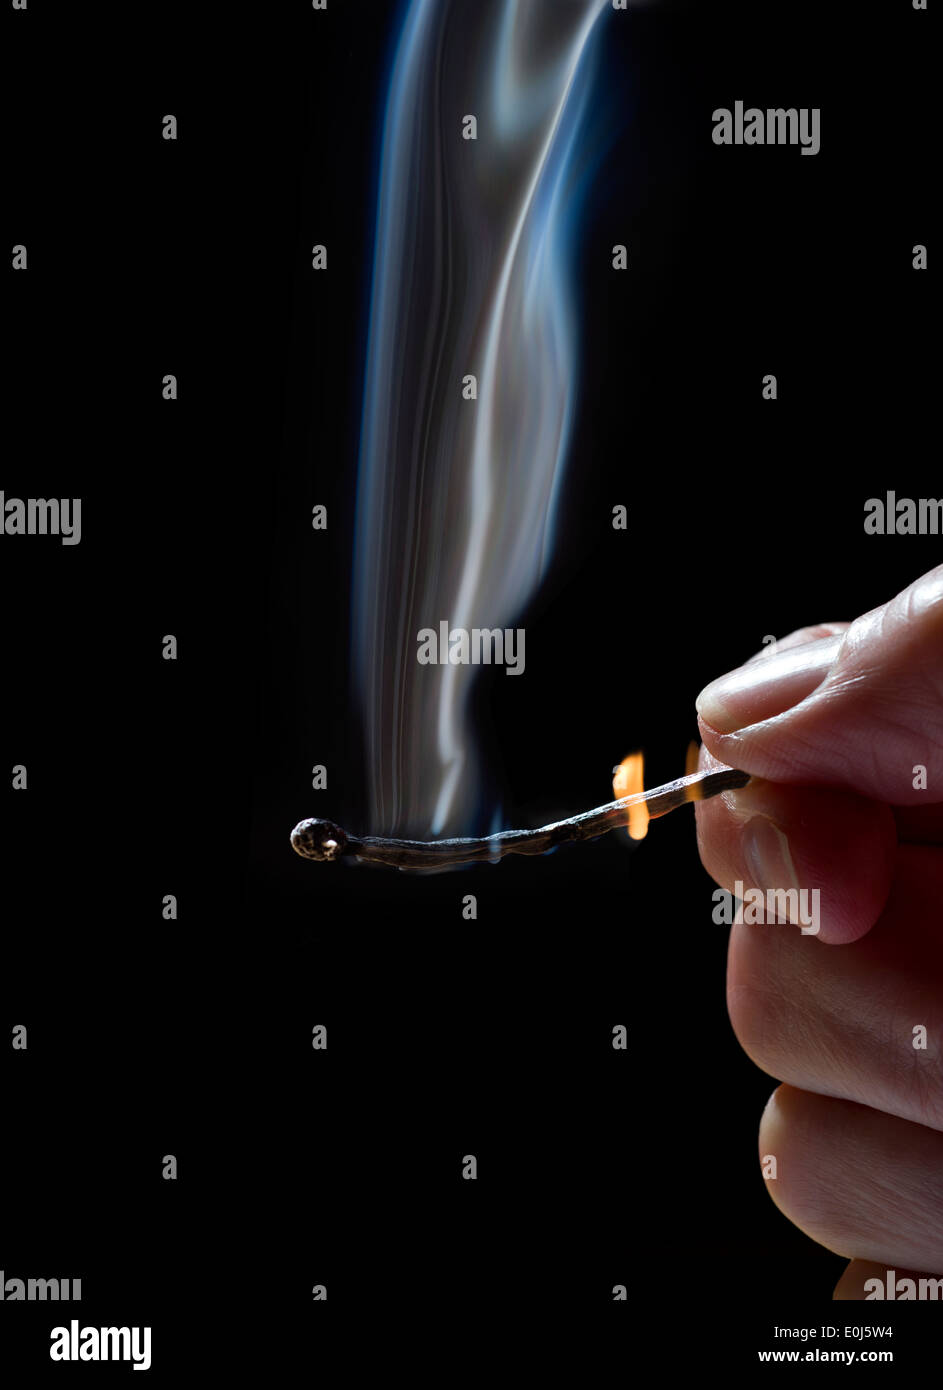 Match burning with the flame almost burning the fingers. Stock Photo